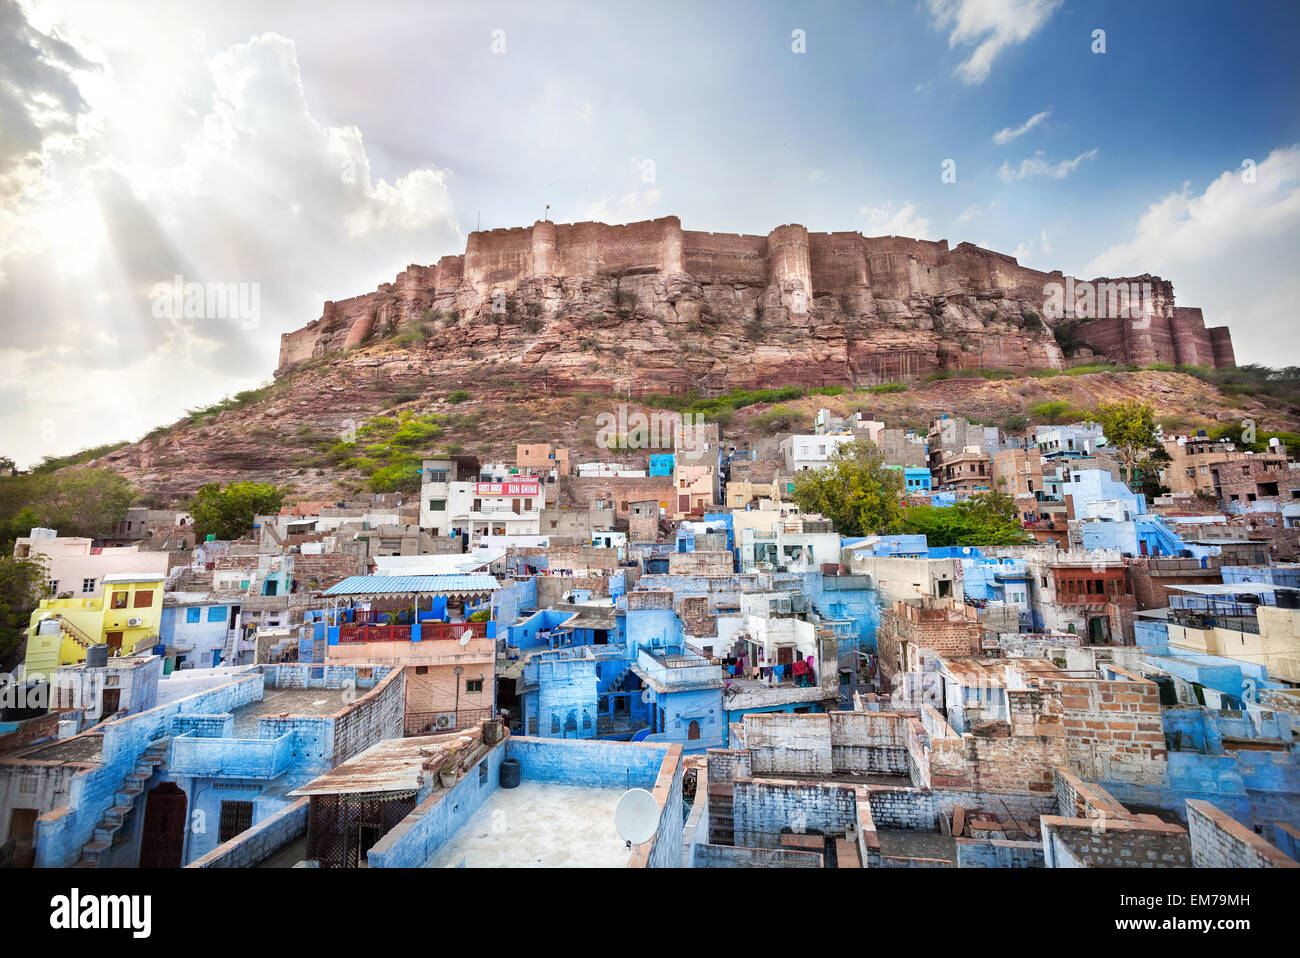 Blue city and Mehrangarh fort on the hill at sunset sky in Jodhpur, Rajasthan, India Stock Photo